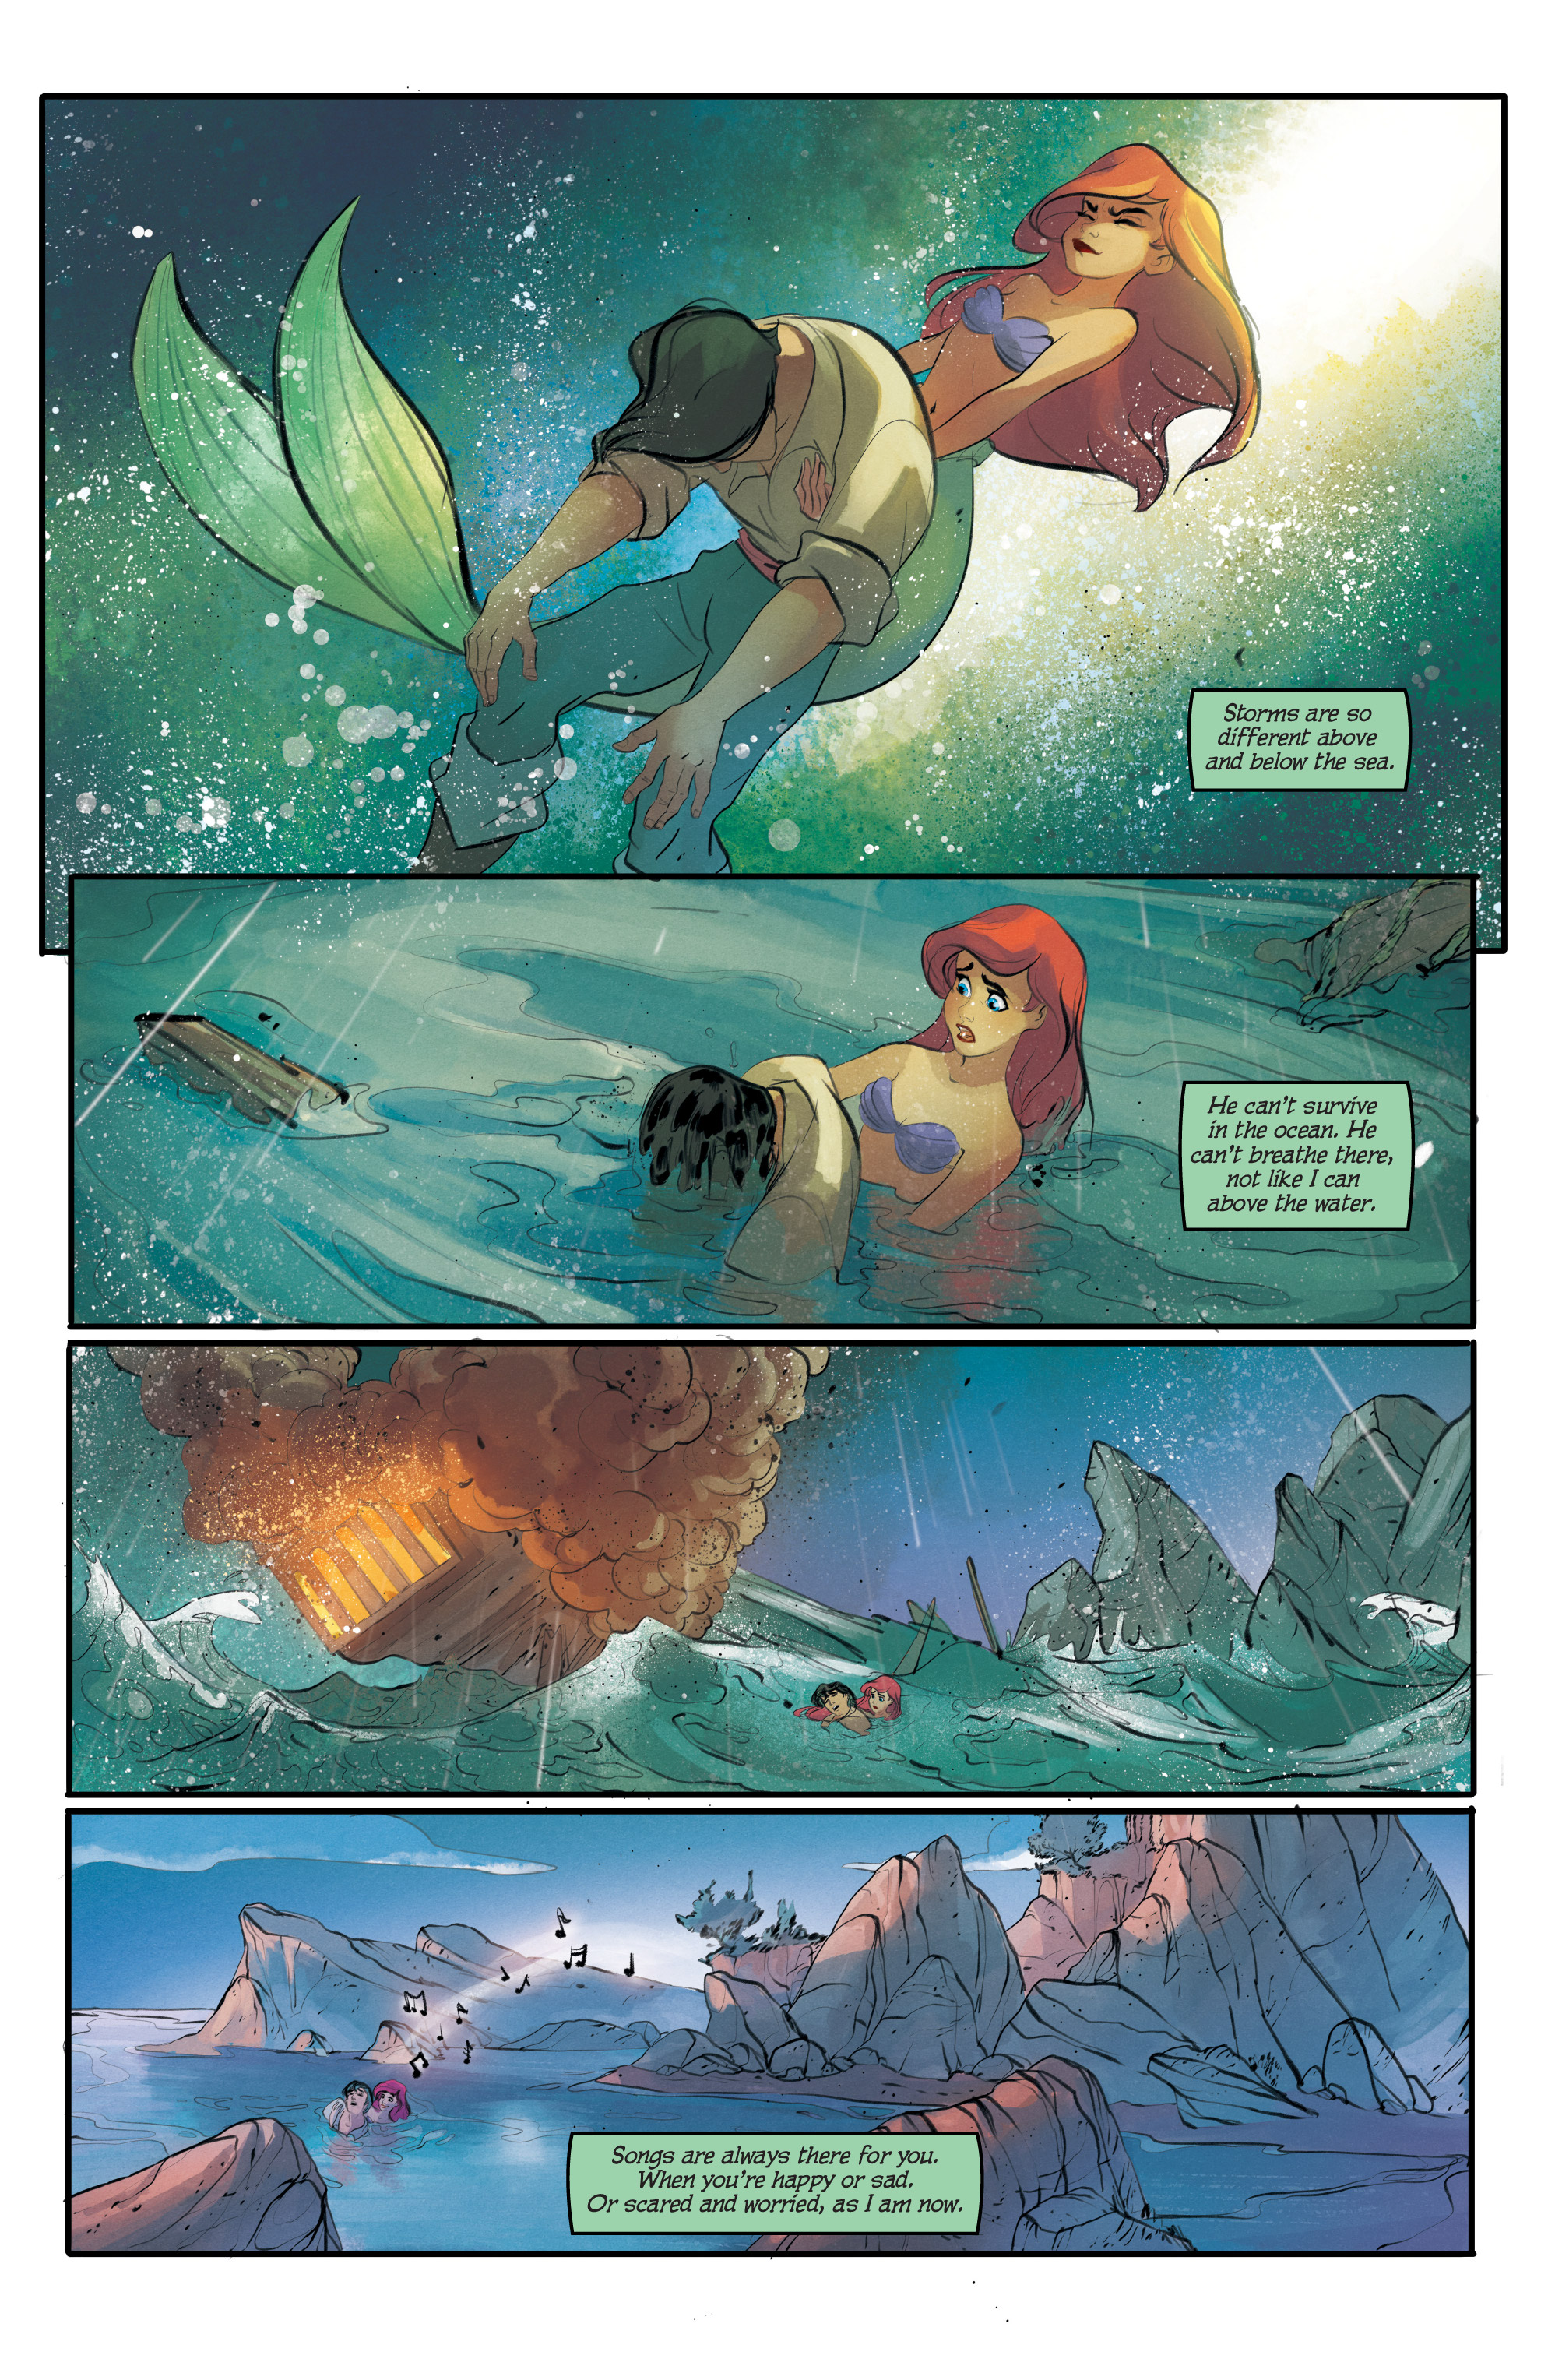 The Little Mermaid 2019 Chapter 1 Page 1